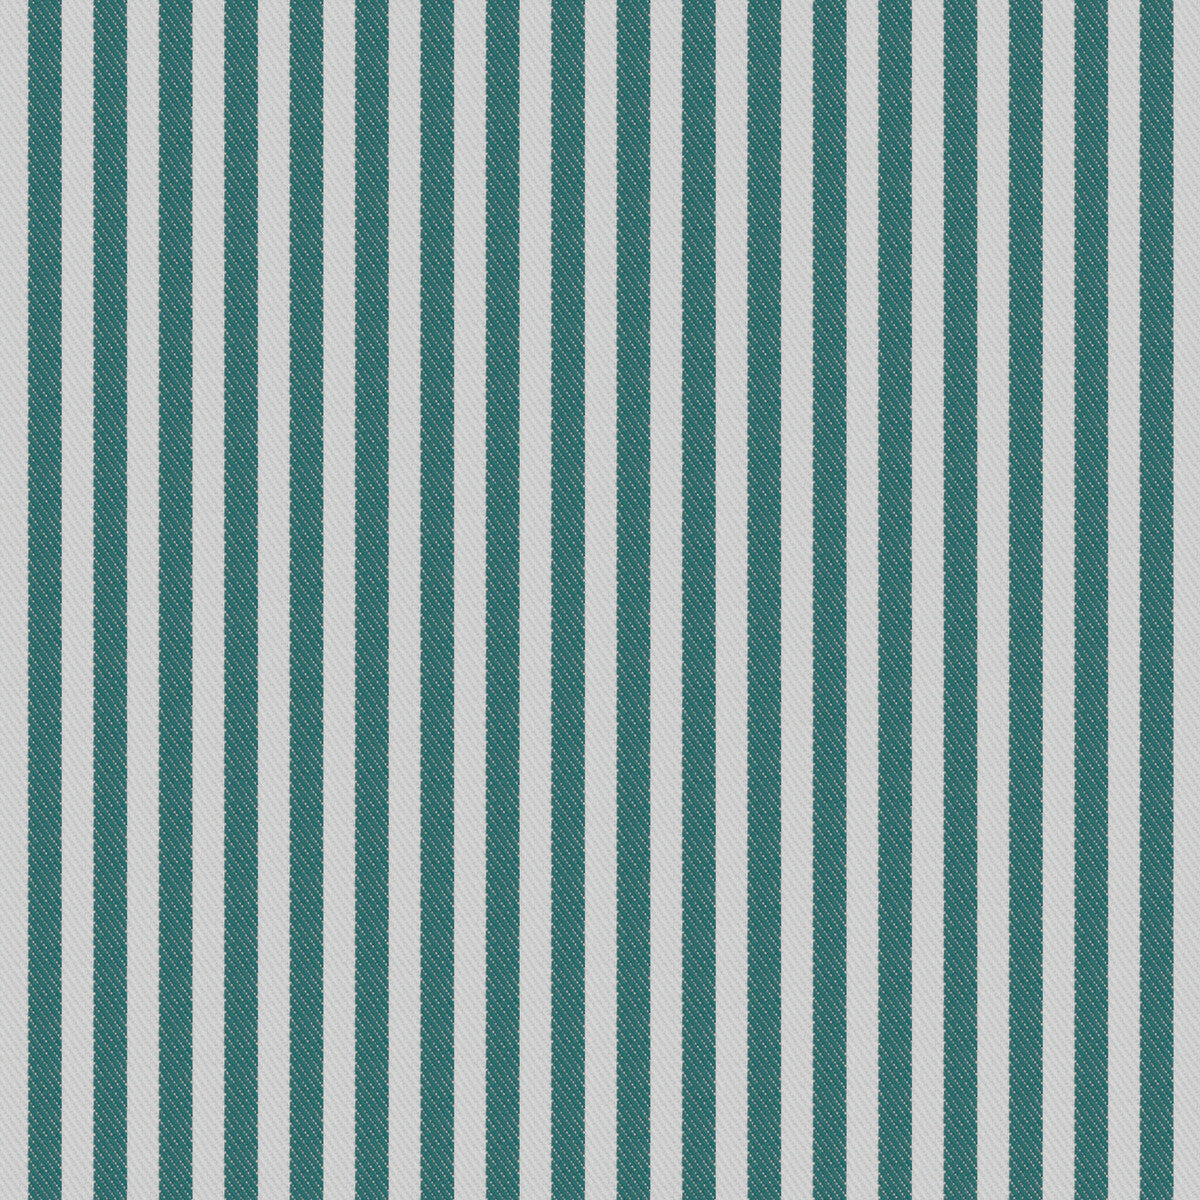 Calobra fabric in agua color - pattern GDT5684.004.0 - by Gaston y Daniela in the Gaston Maiorica collection